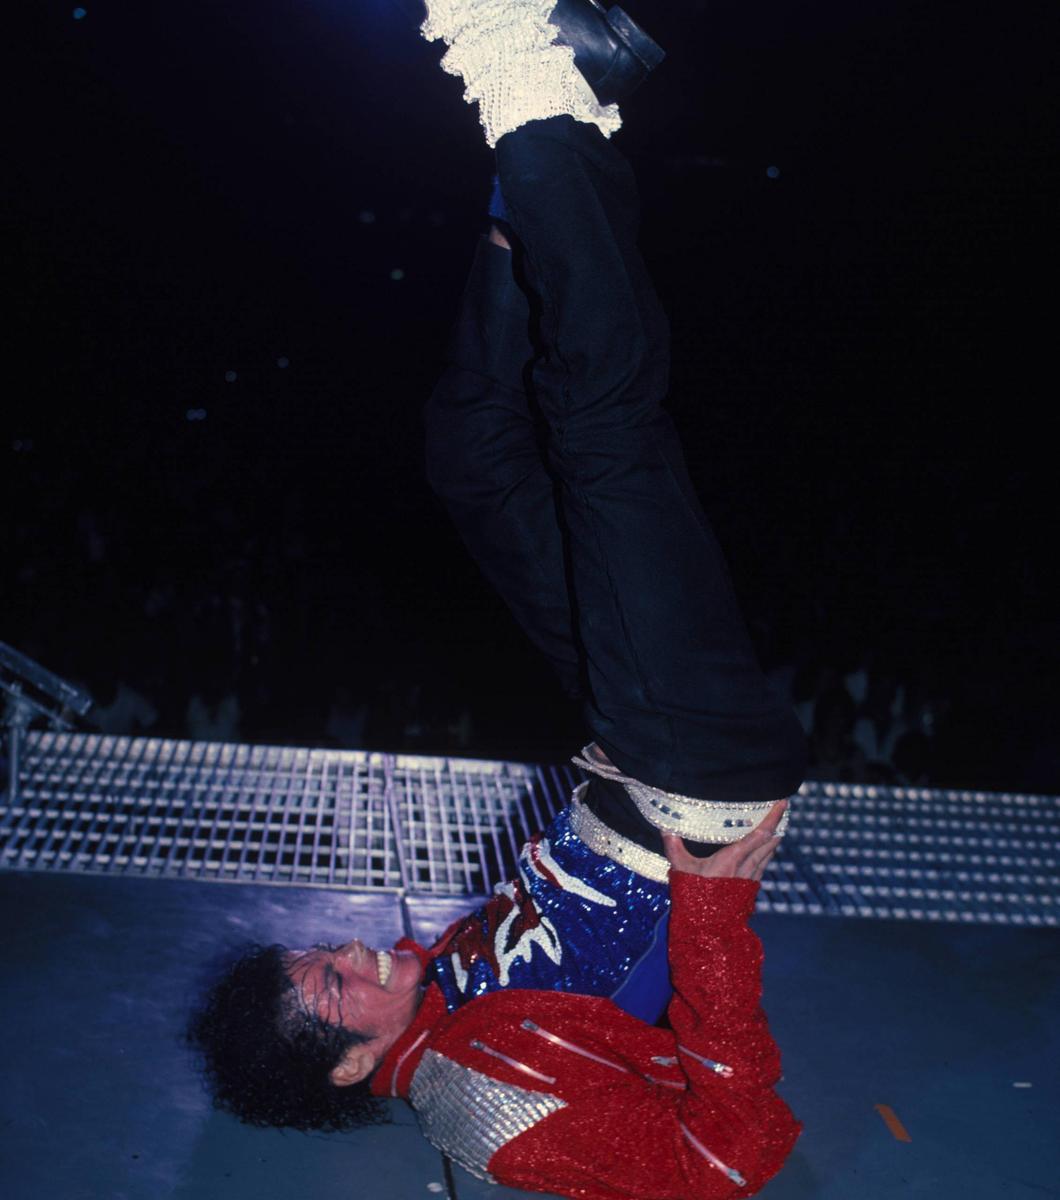 Victory-Tour-on-Stage-the-thriller-era-o